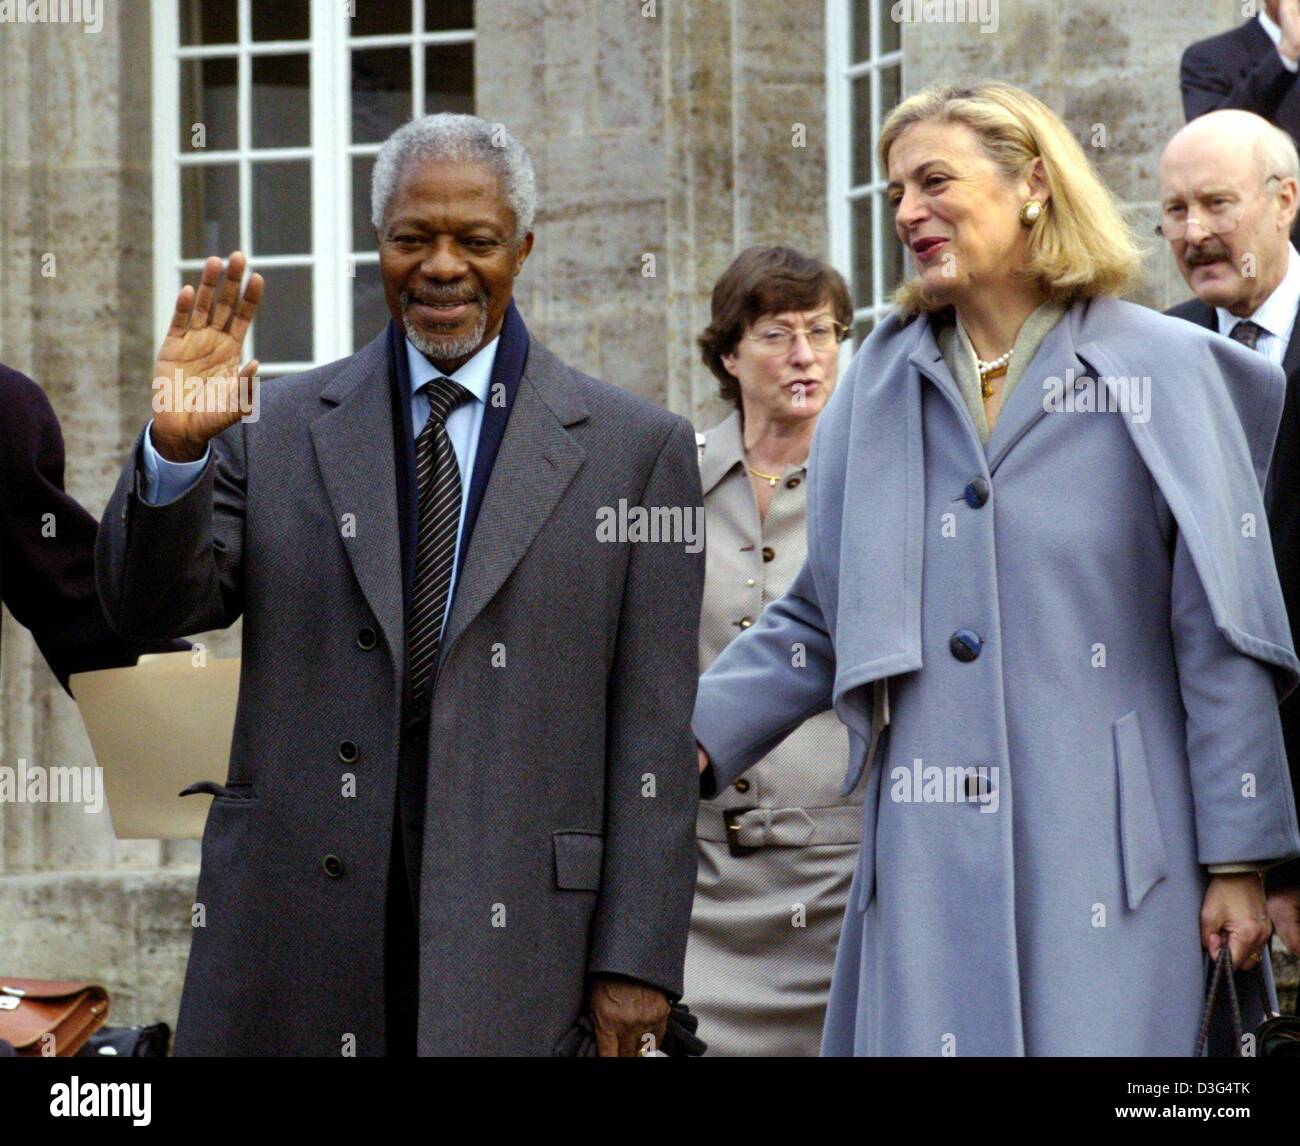 (dpa) - UN Secretary-General Kofi Annan waves after his speech at the Eberhard-Karls-University in Tuebingen, Germany, 12 December 2003. On the right his wife Nane. Peace Nobel Price laureate Annan has called for more tolerance, solidarity and compassion speaking to hundreds of invited guests at the university. Stock Photo